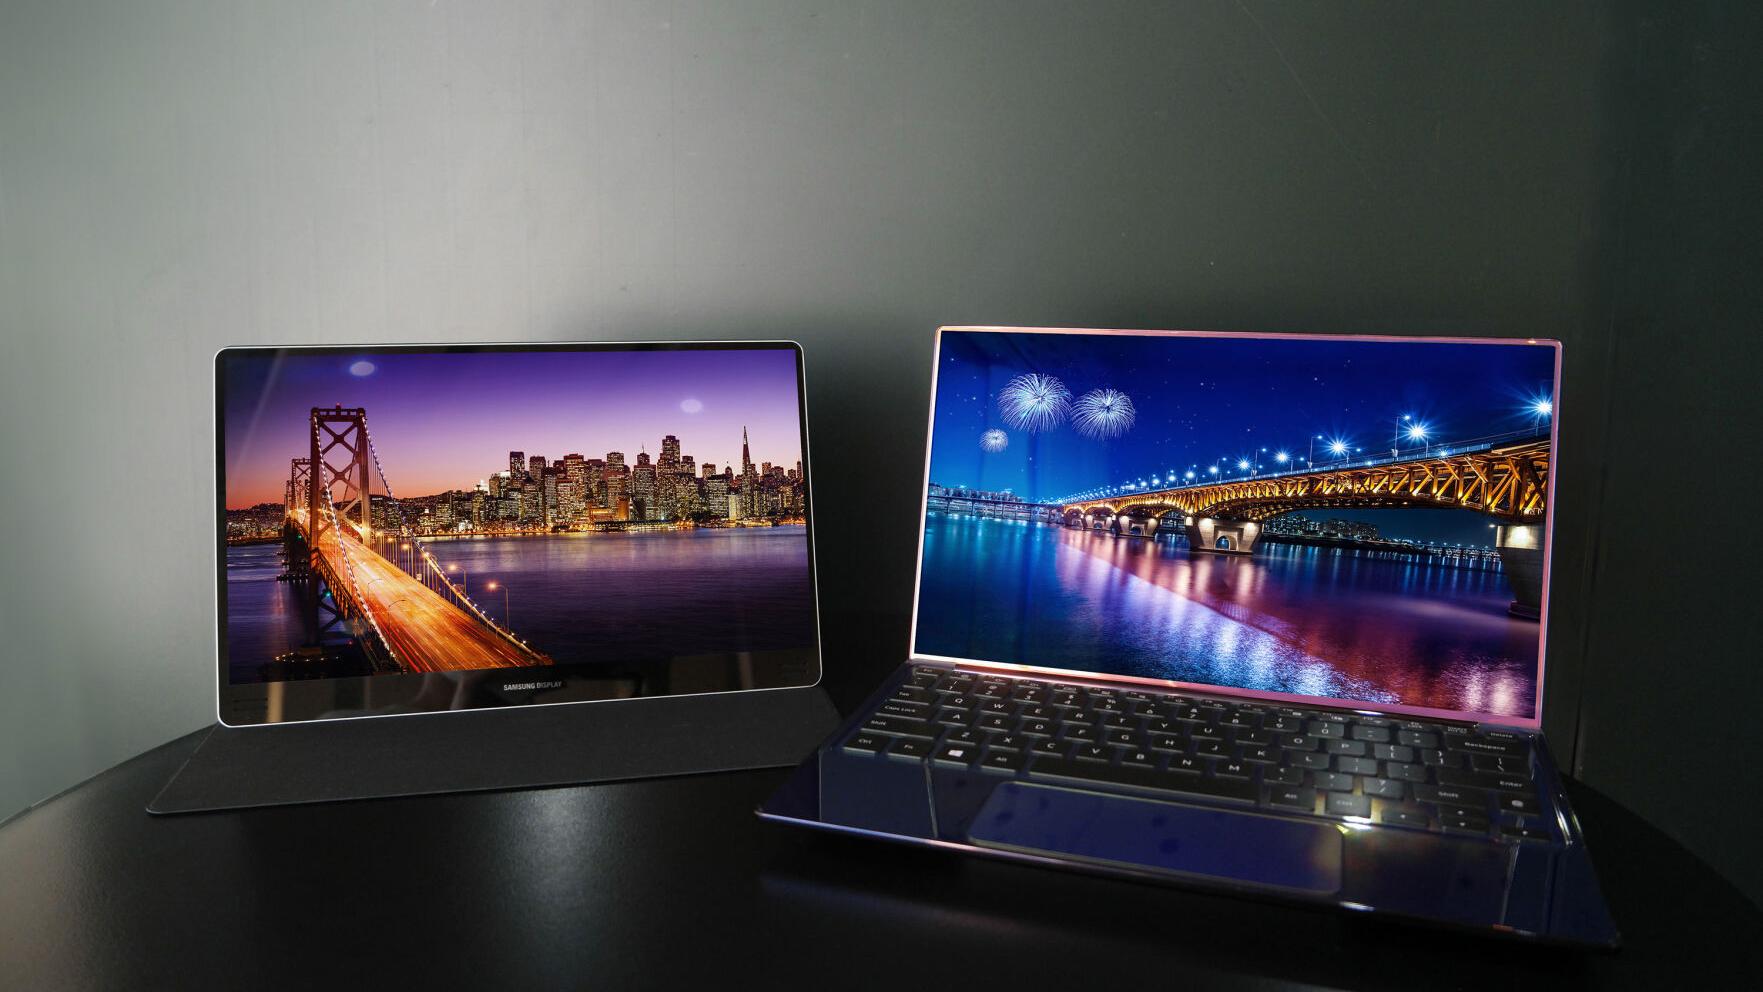 Samsung’s OLED screens for laptops give excellent image quality